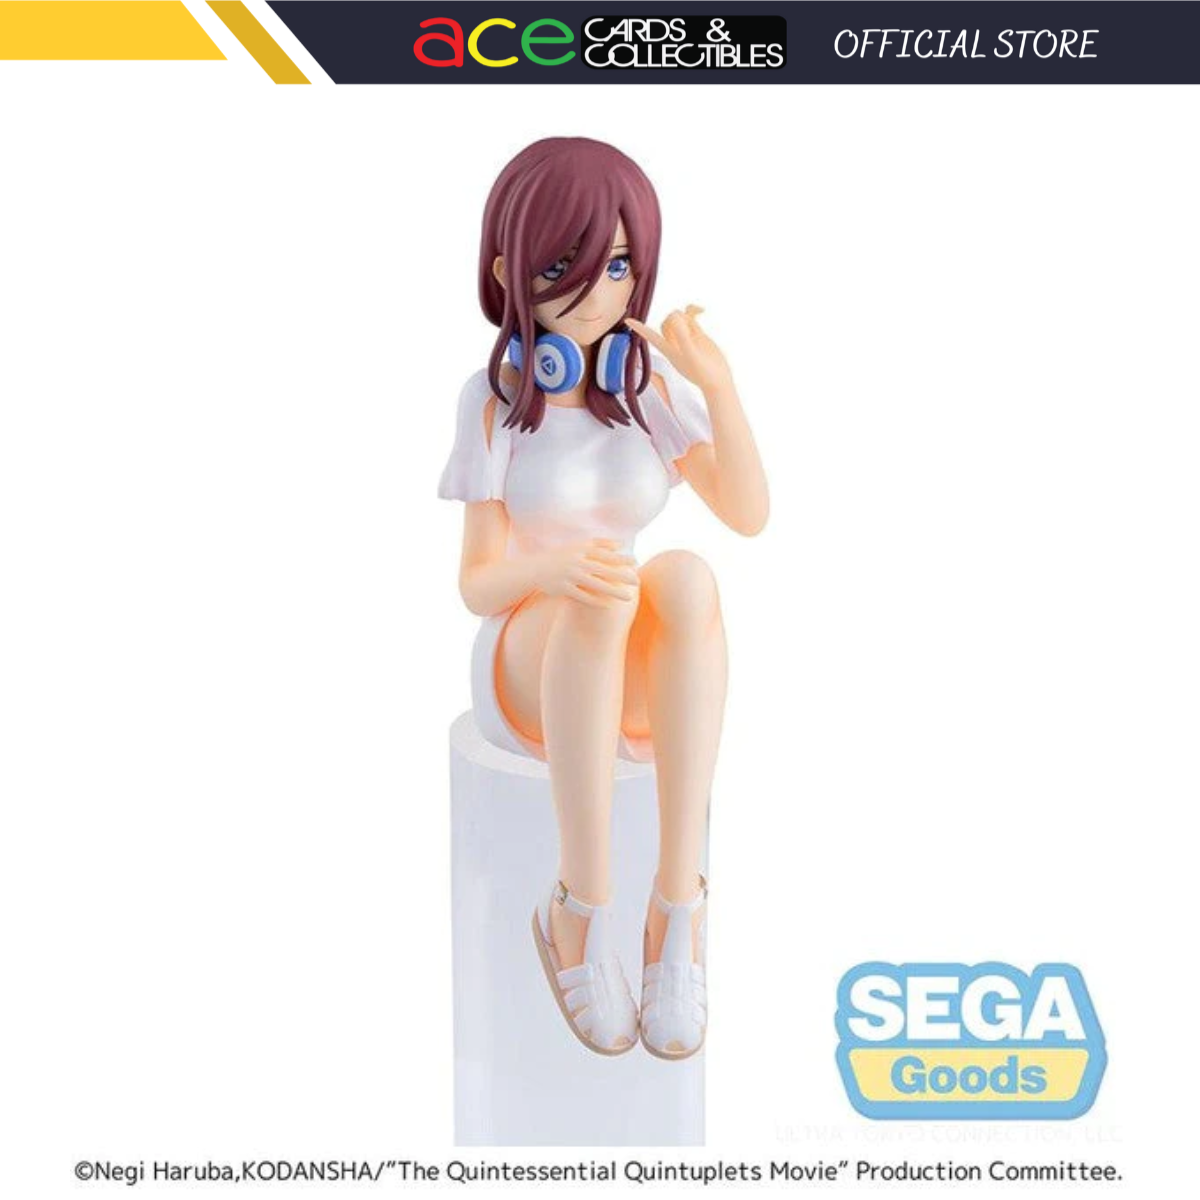 The Quintessential Quintuplets Movie PM Perching Figure "Miku Nakano"-Sega-Ace Cards & Collectibles